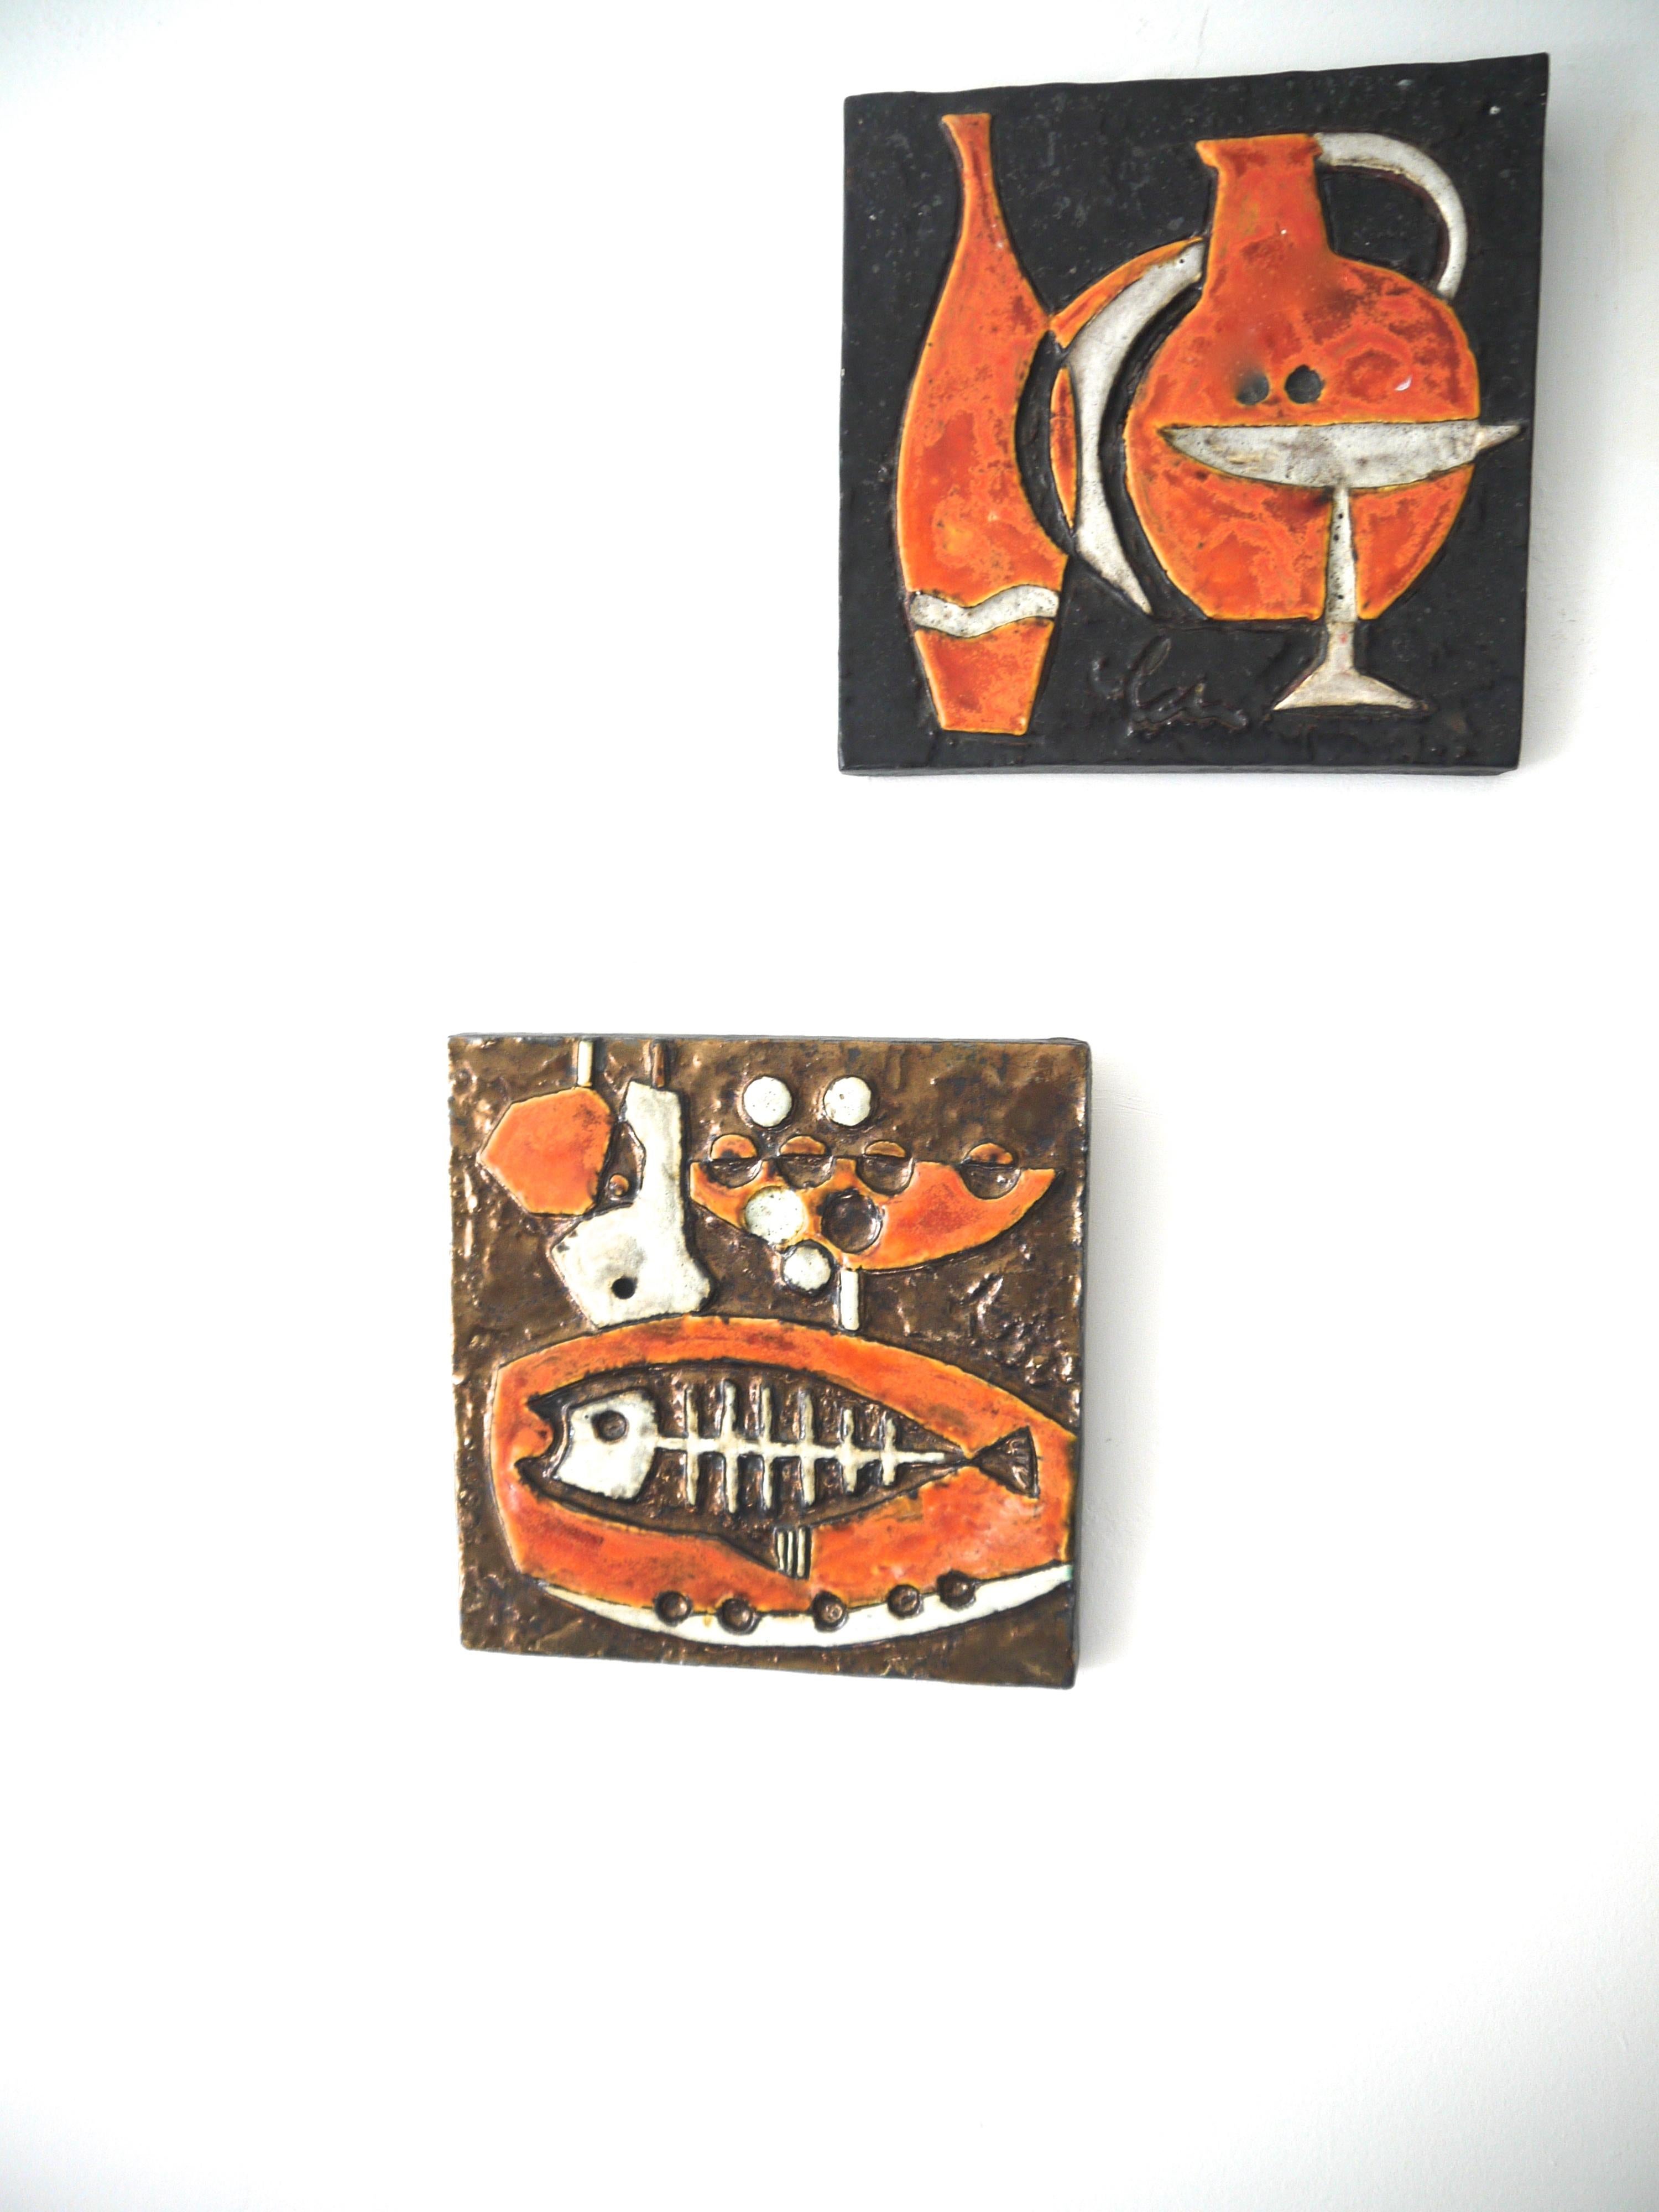 Modernist ceramic wall plaques - Set of three by Helmut Schaffenacker late 1950s. The complete series celebrates music, food and wine. 

The plaques are 23cms square and approximate 3cms in depth.

 